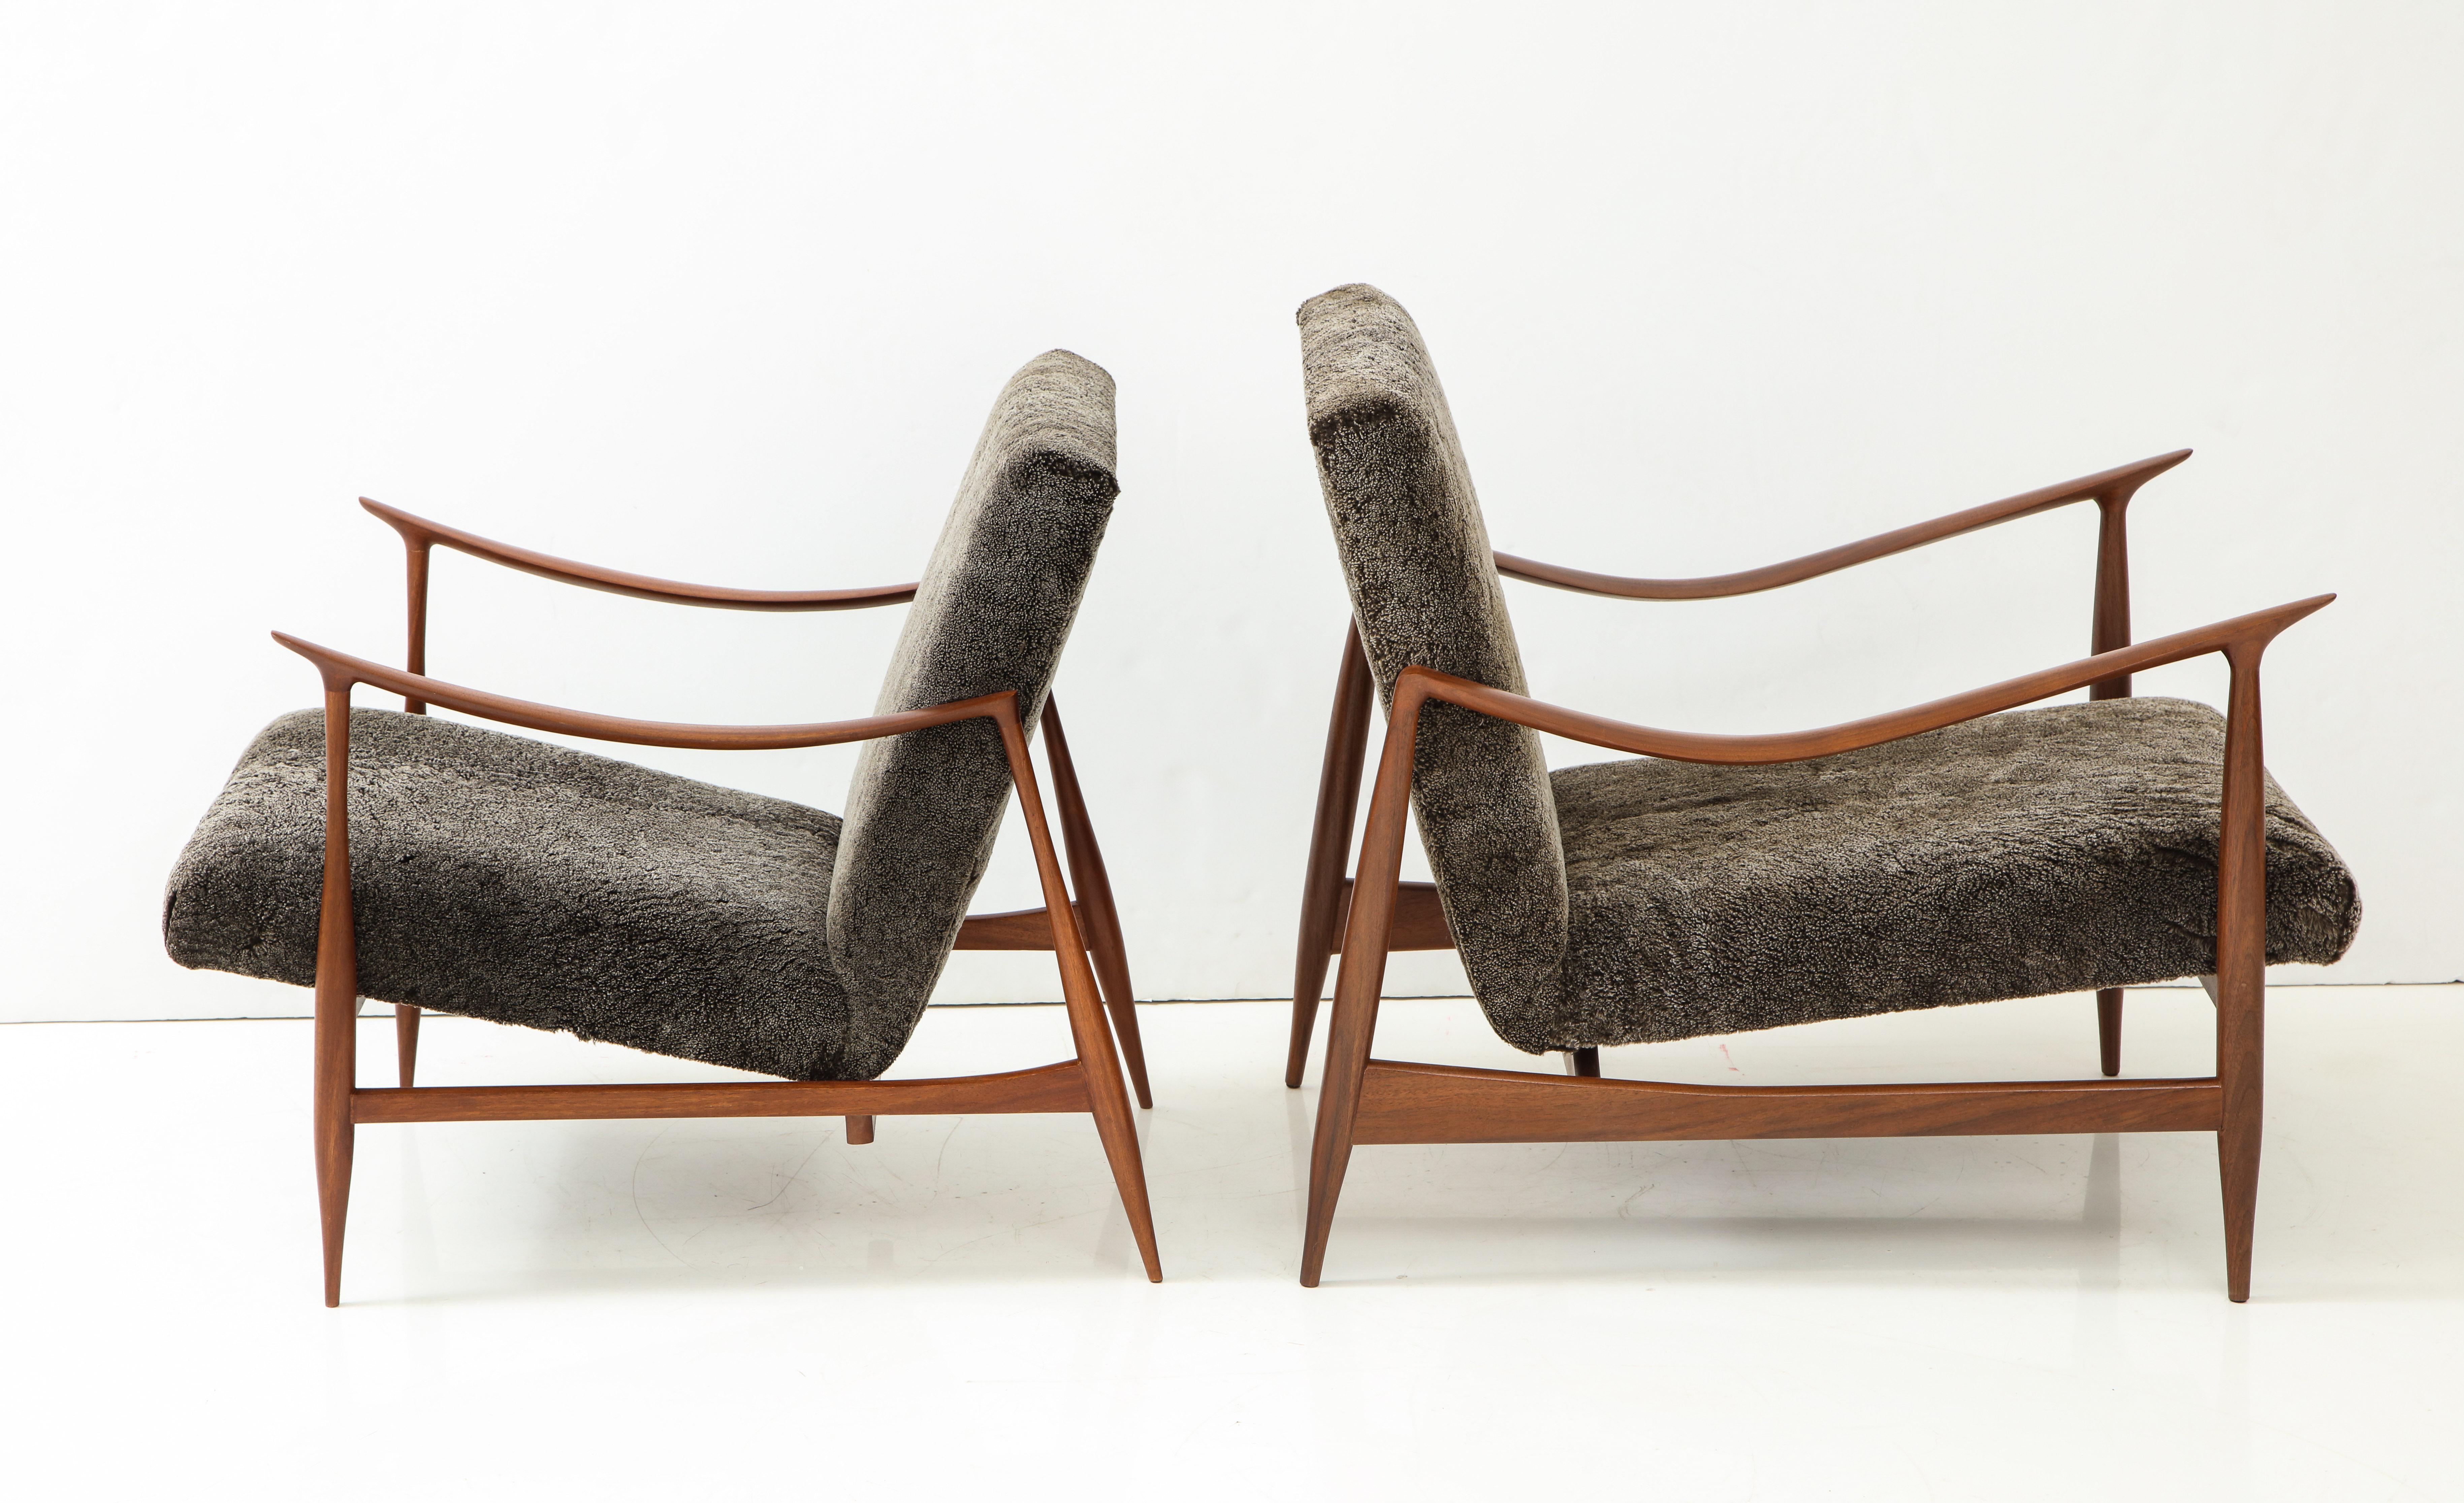 Contemporary Brazilian Style Lounge Chairs with Walnut Frames & Lamb's Wool Upholstery